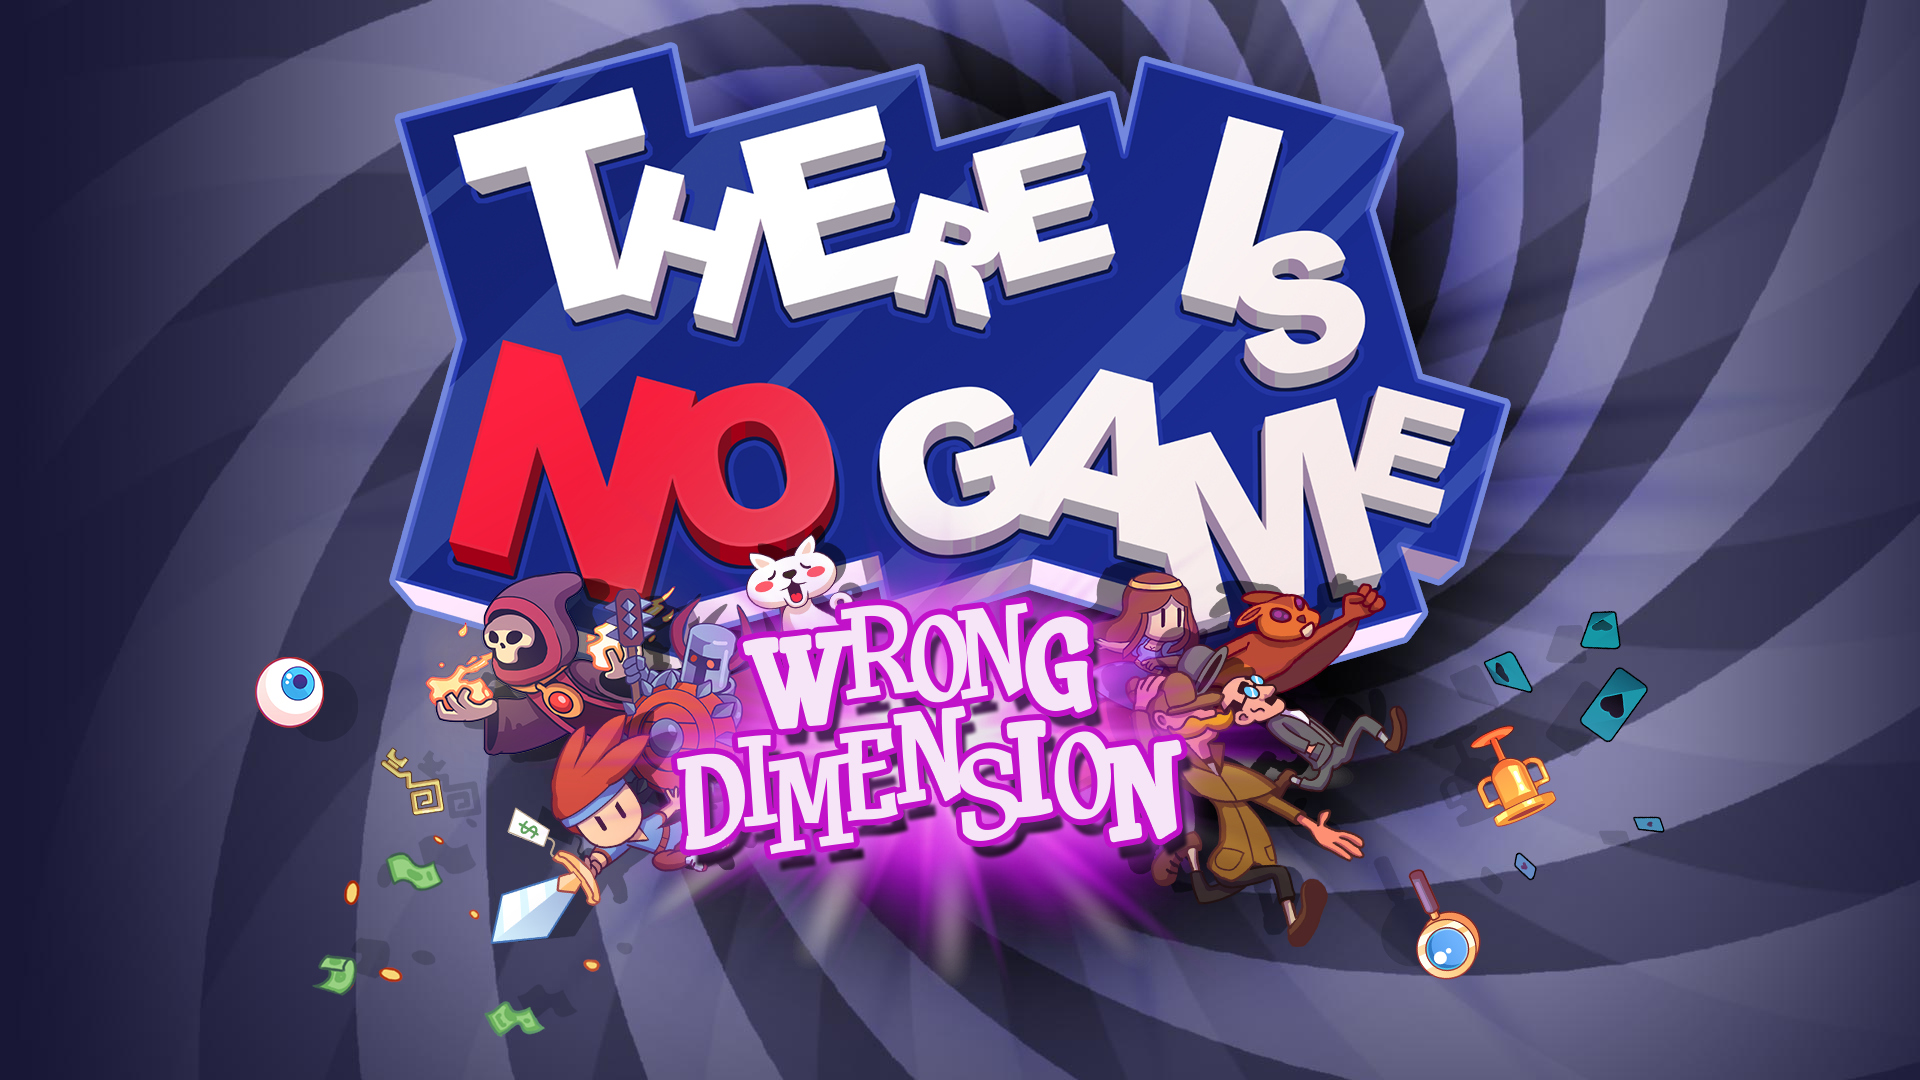 There is No Game: Wrong Dimension: free desktop wallpaper and background image